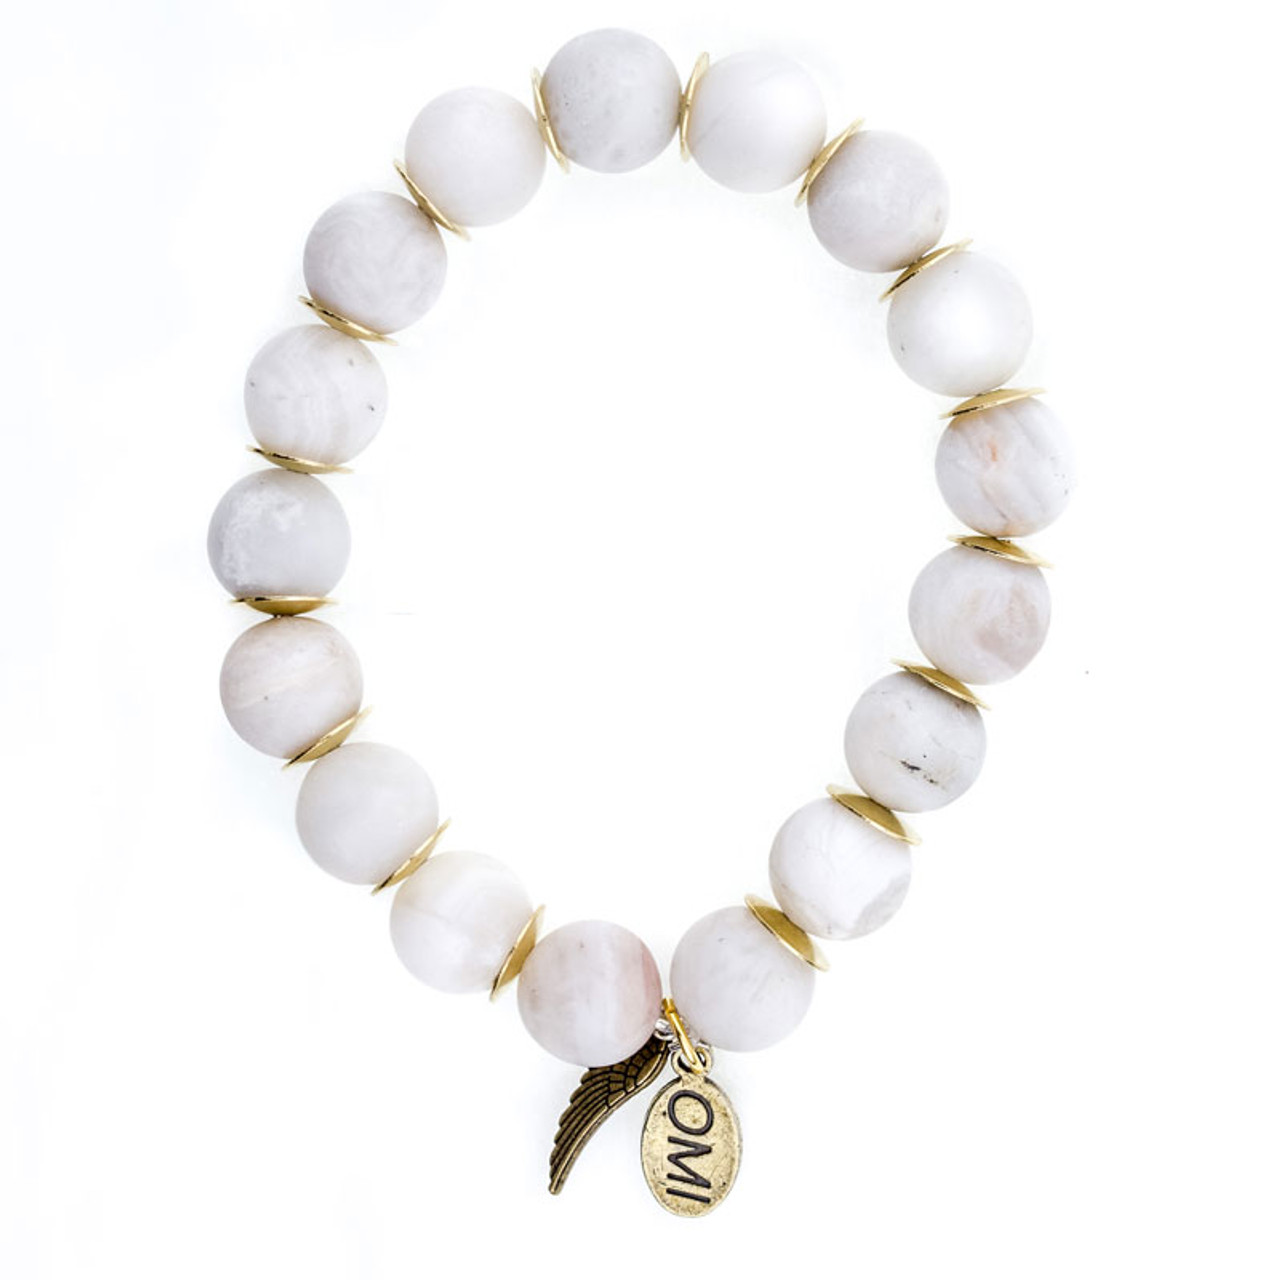 White Big Bead Bracelet with Gold Spacers - Wholesale